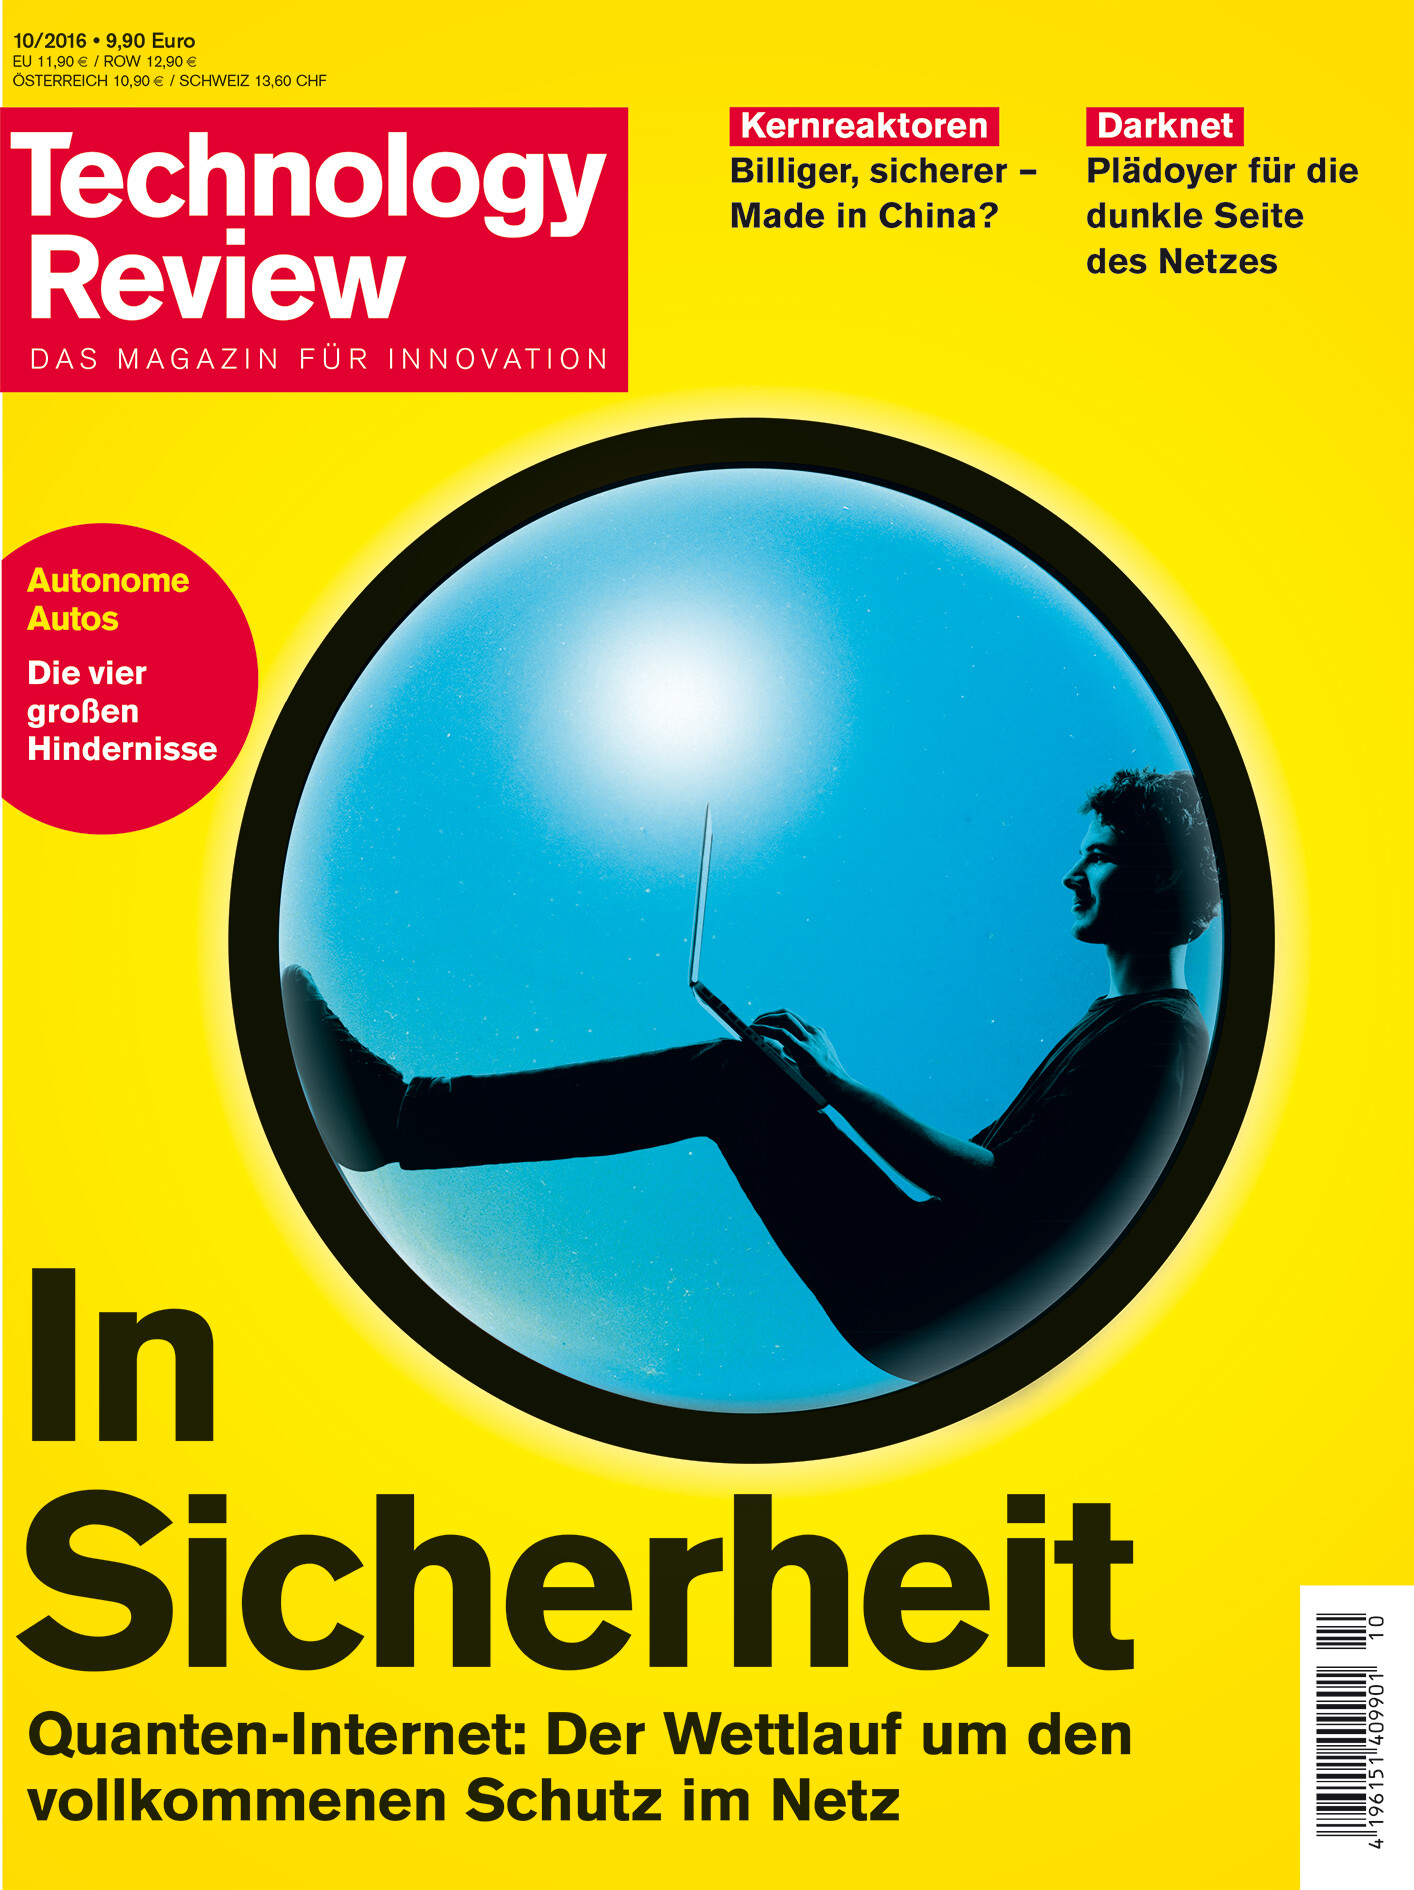 Technology Review 10/2016